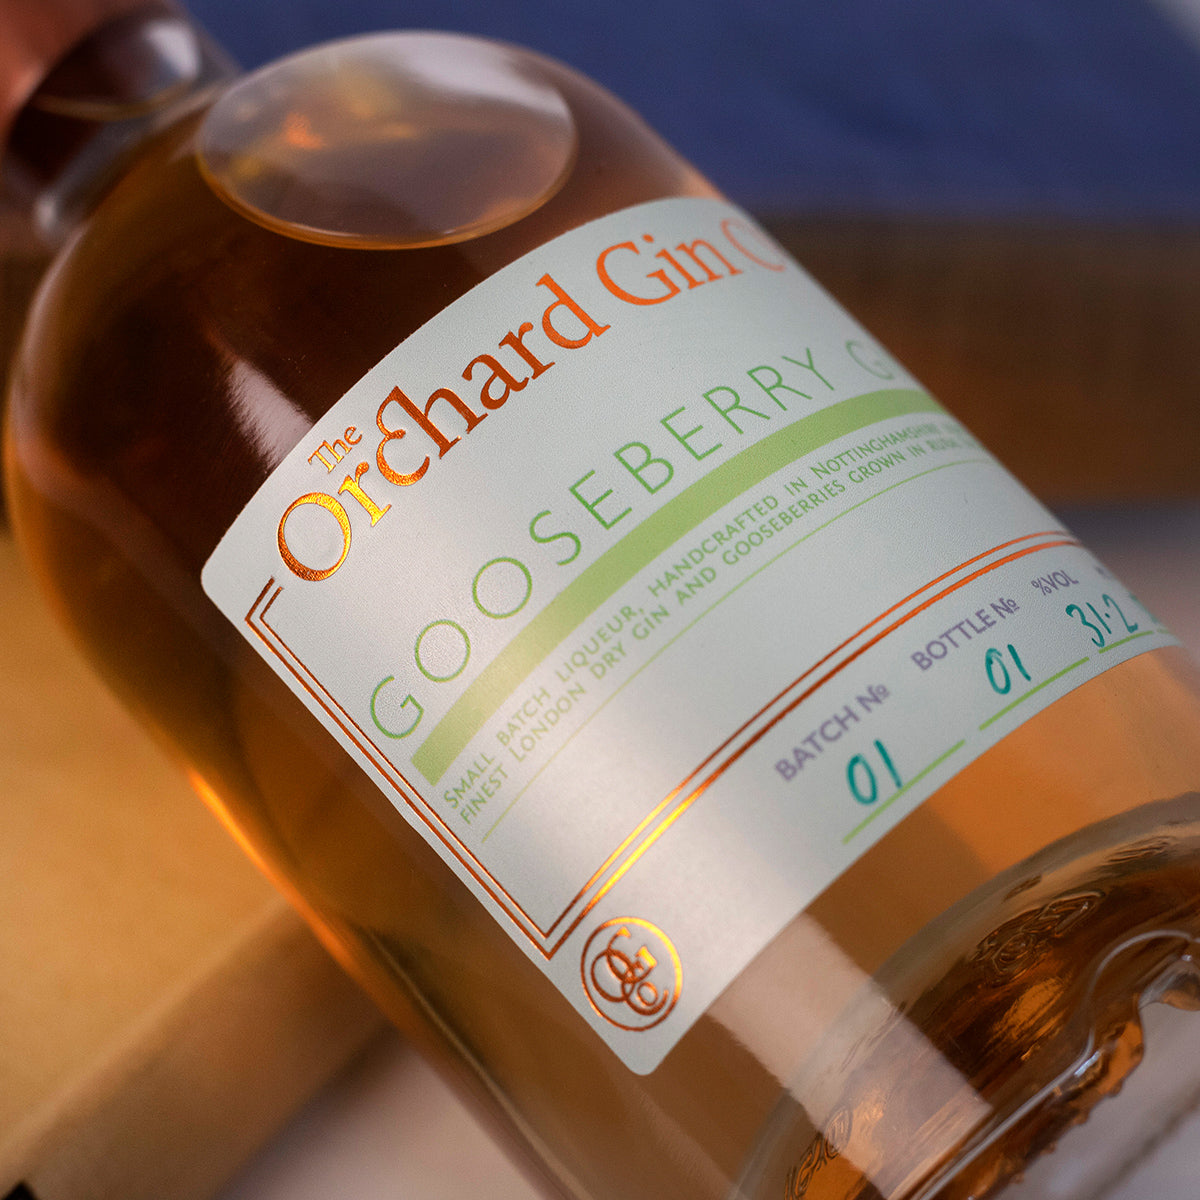 Gooseberry Gin - The Orchard Gin Co